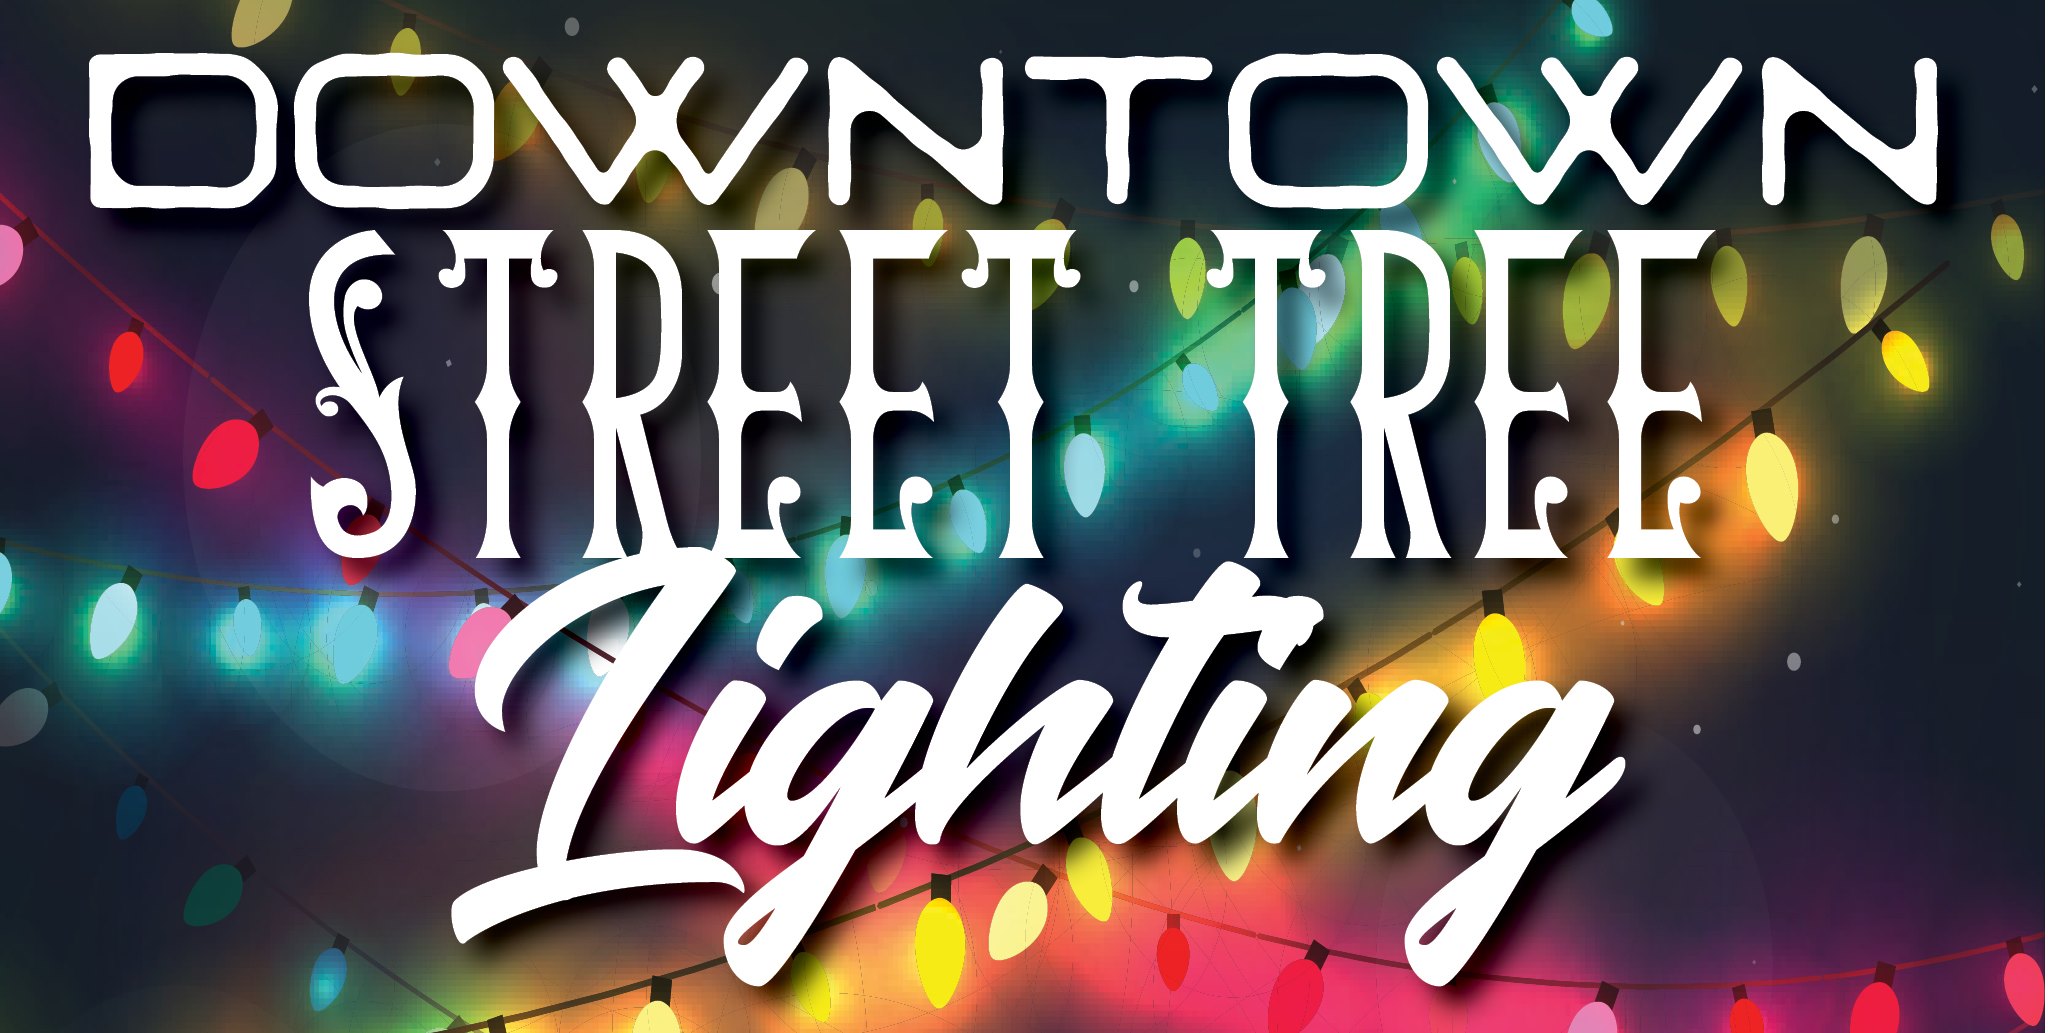 <h1 class="tribe-events-single-event-title">Downtown Moses Lake Street Tree Lighting</h1>